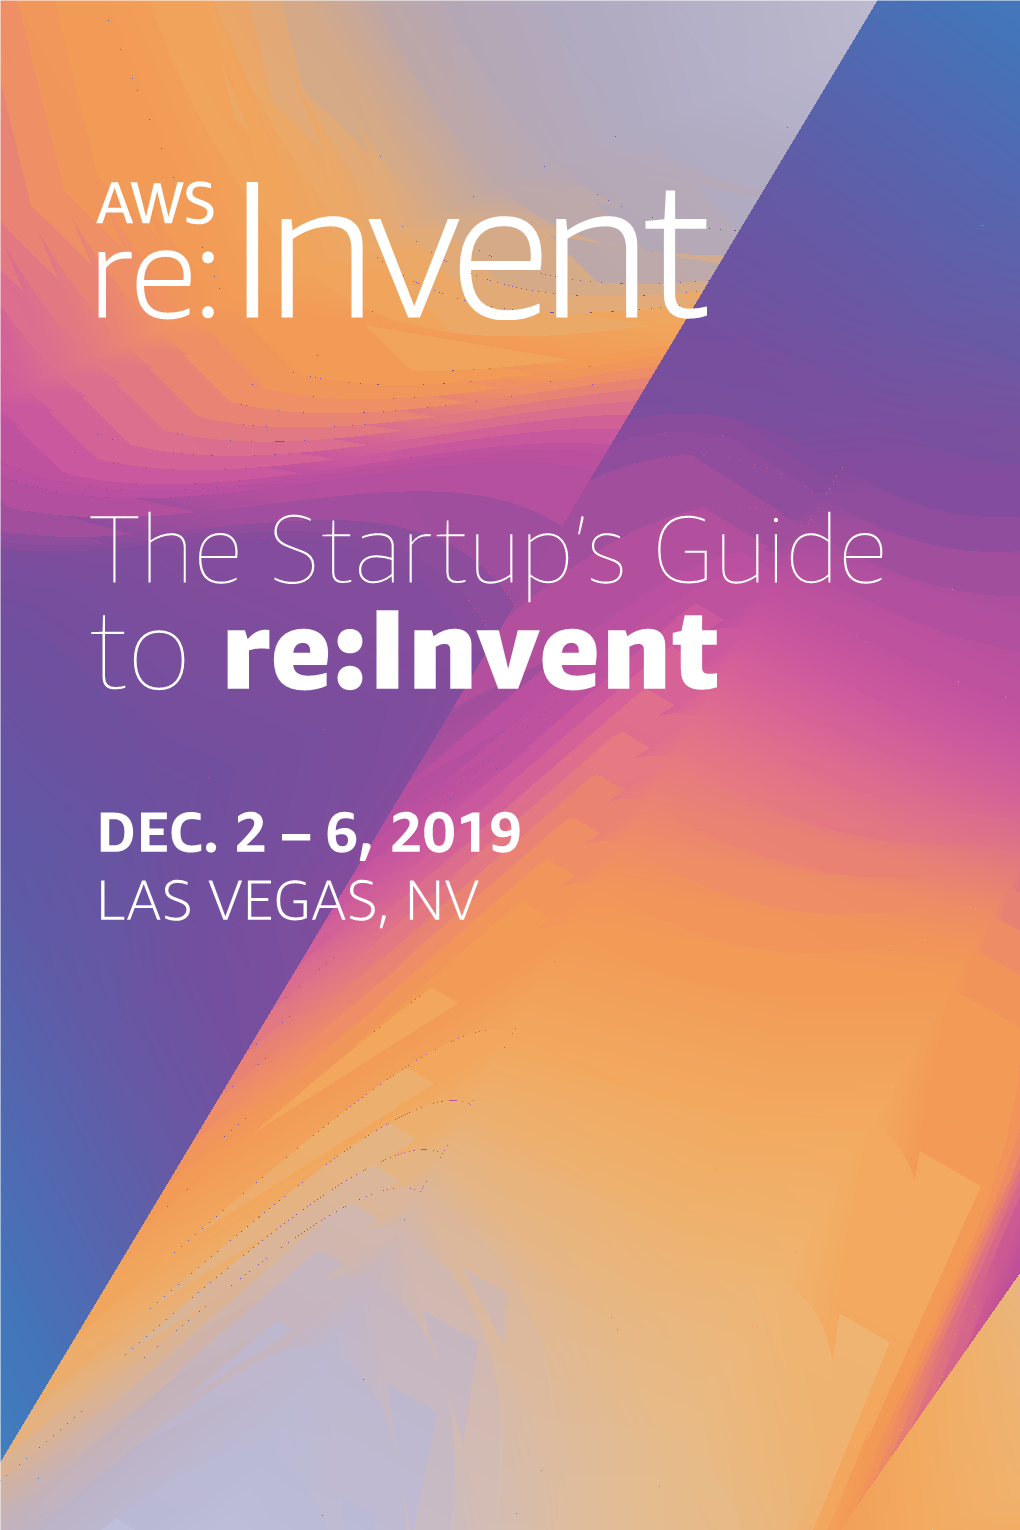 To Re:Invent